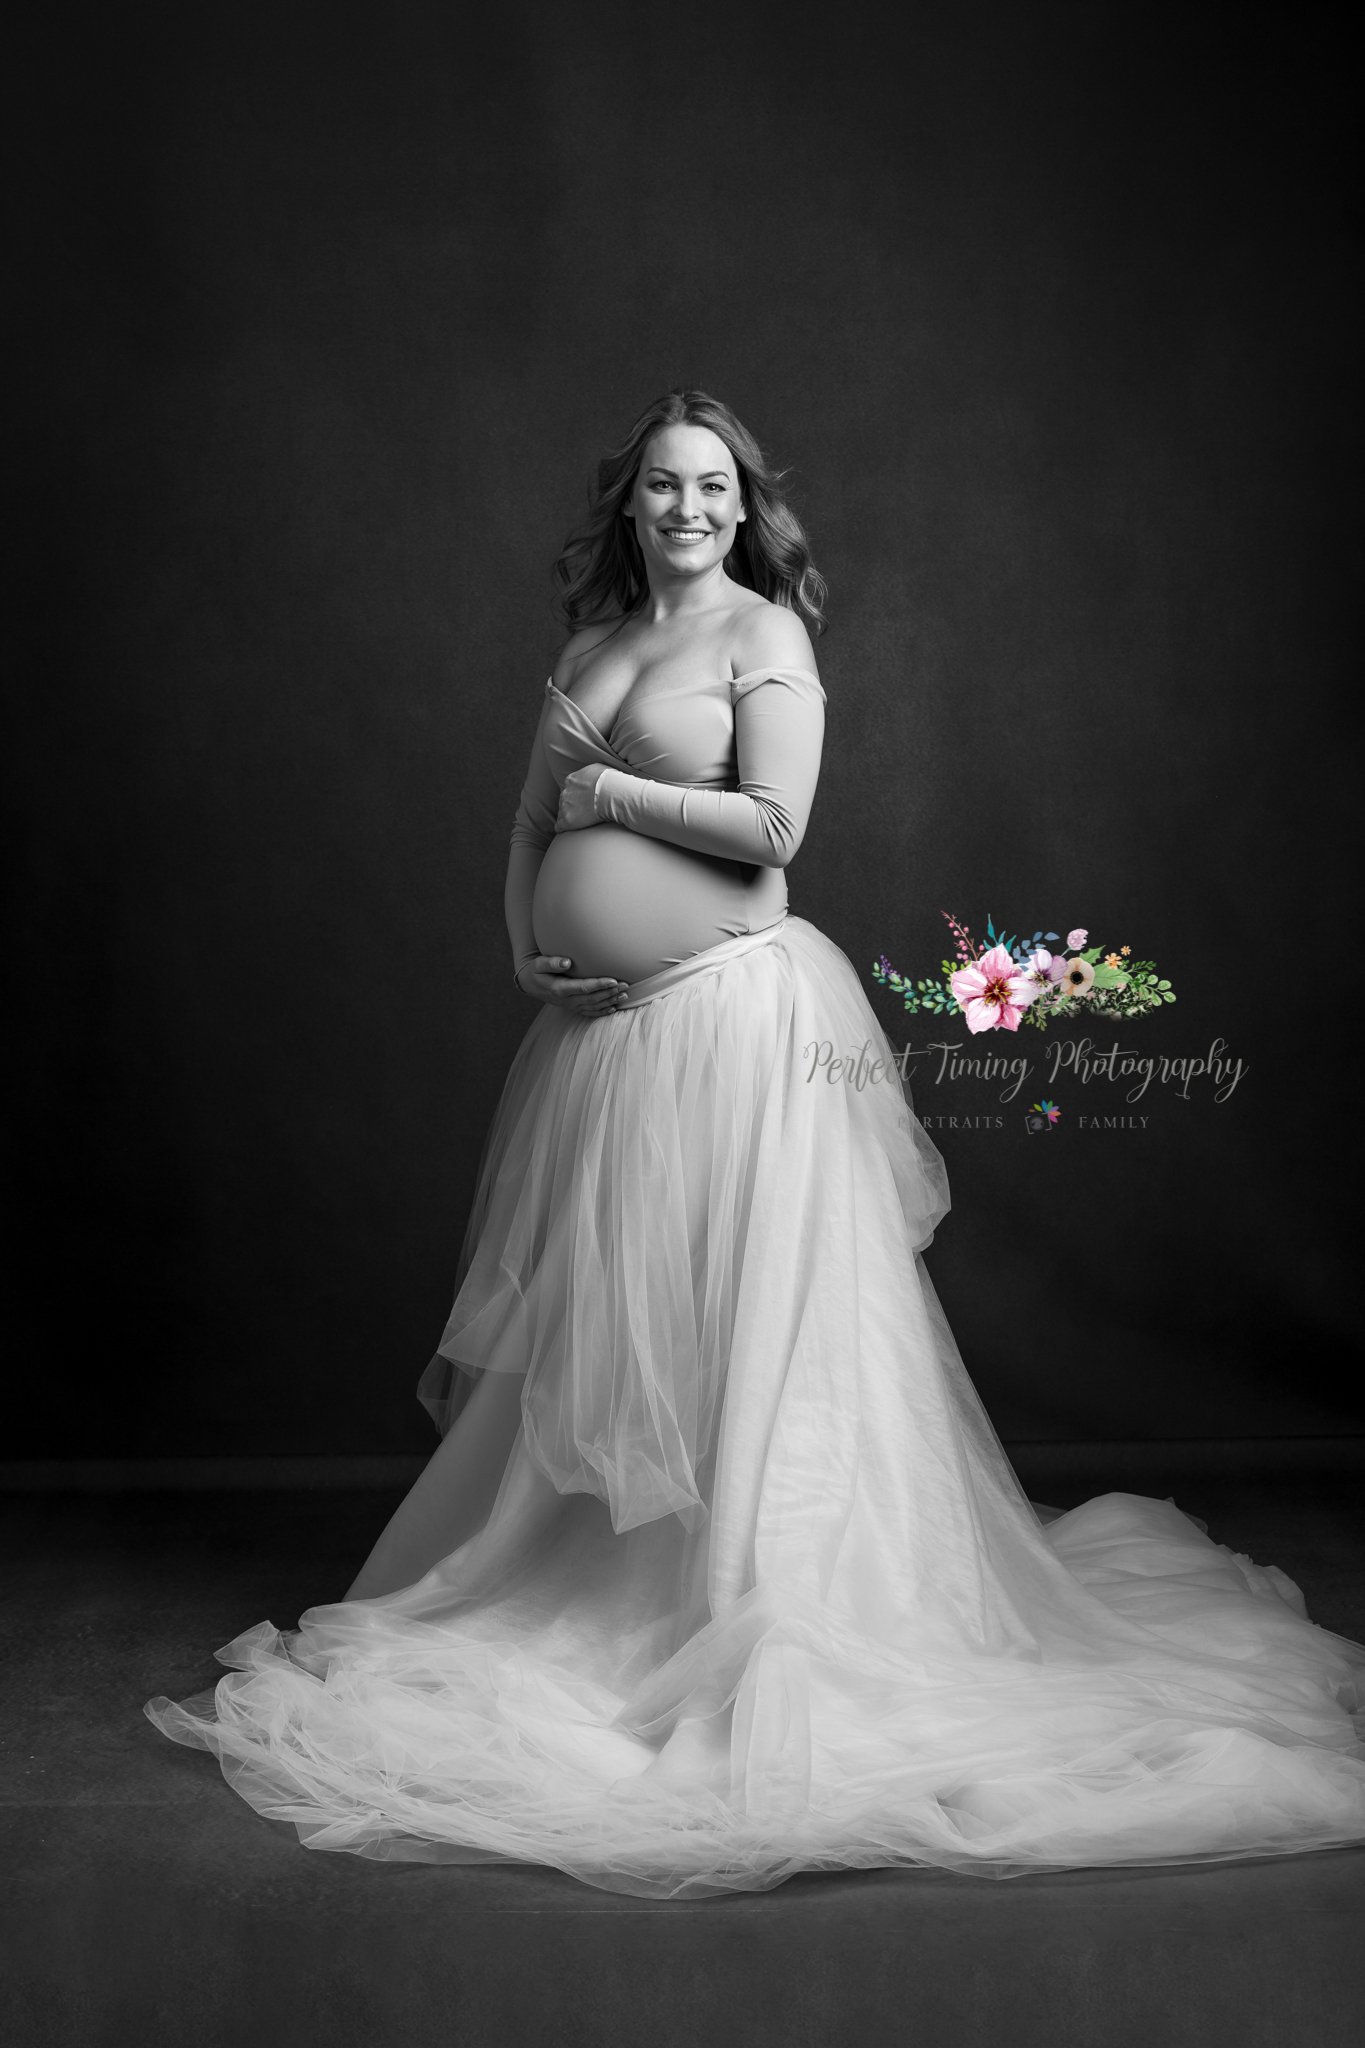 Maternity_Perfect Timing Photography_011.jpg